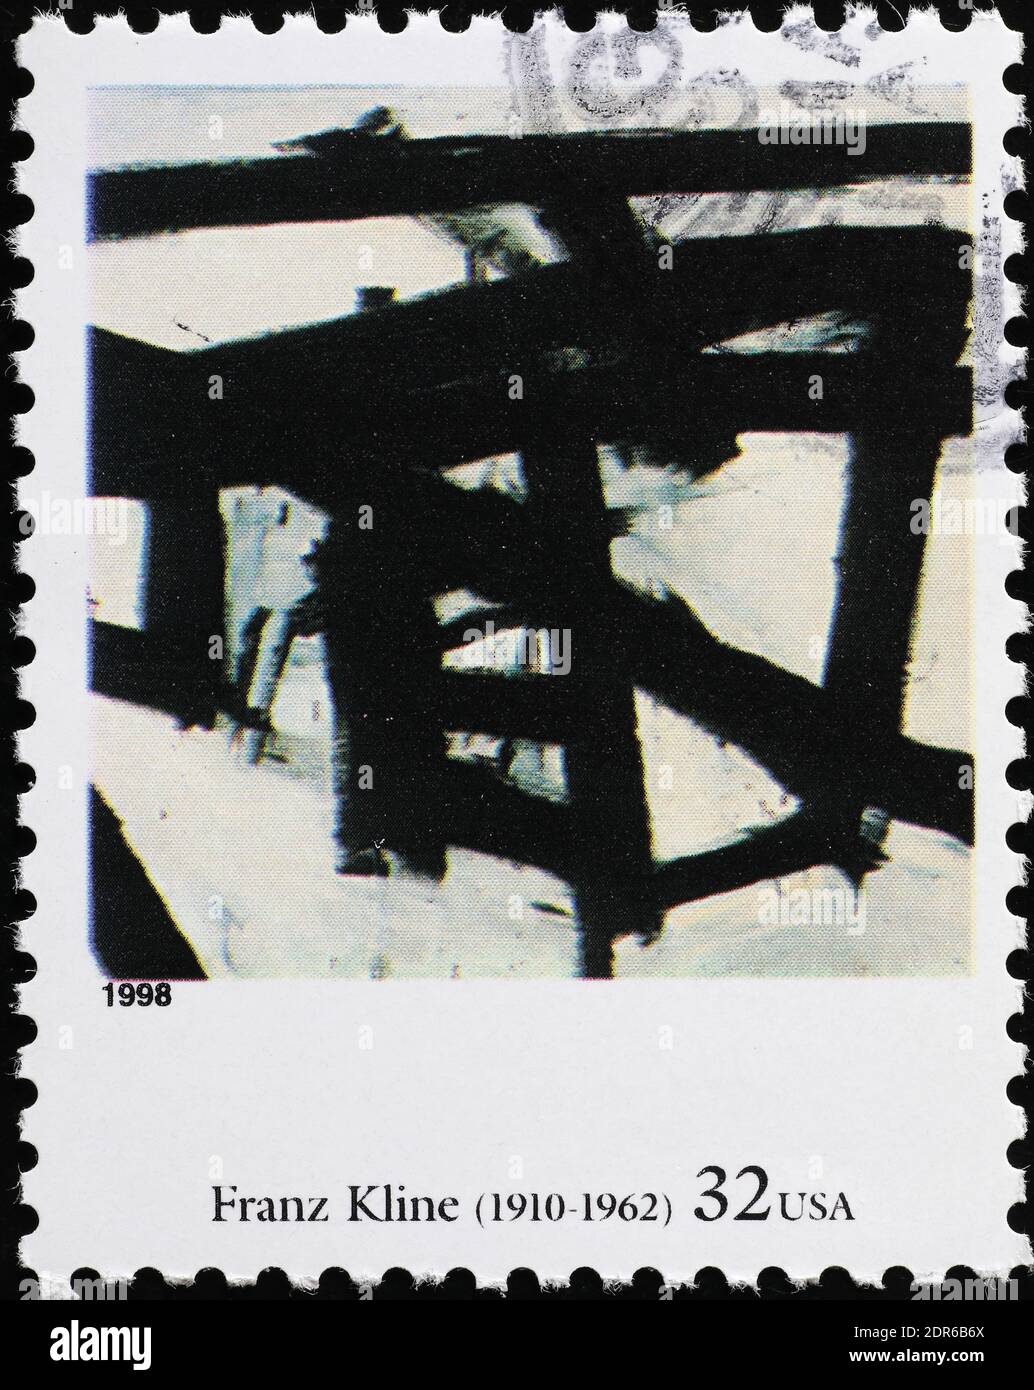 Mahoning by Franz Kline on american stamp Stock Photo